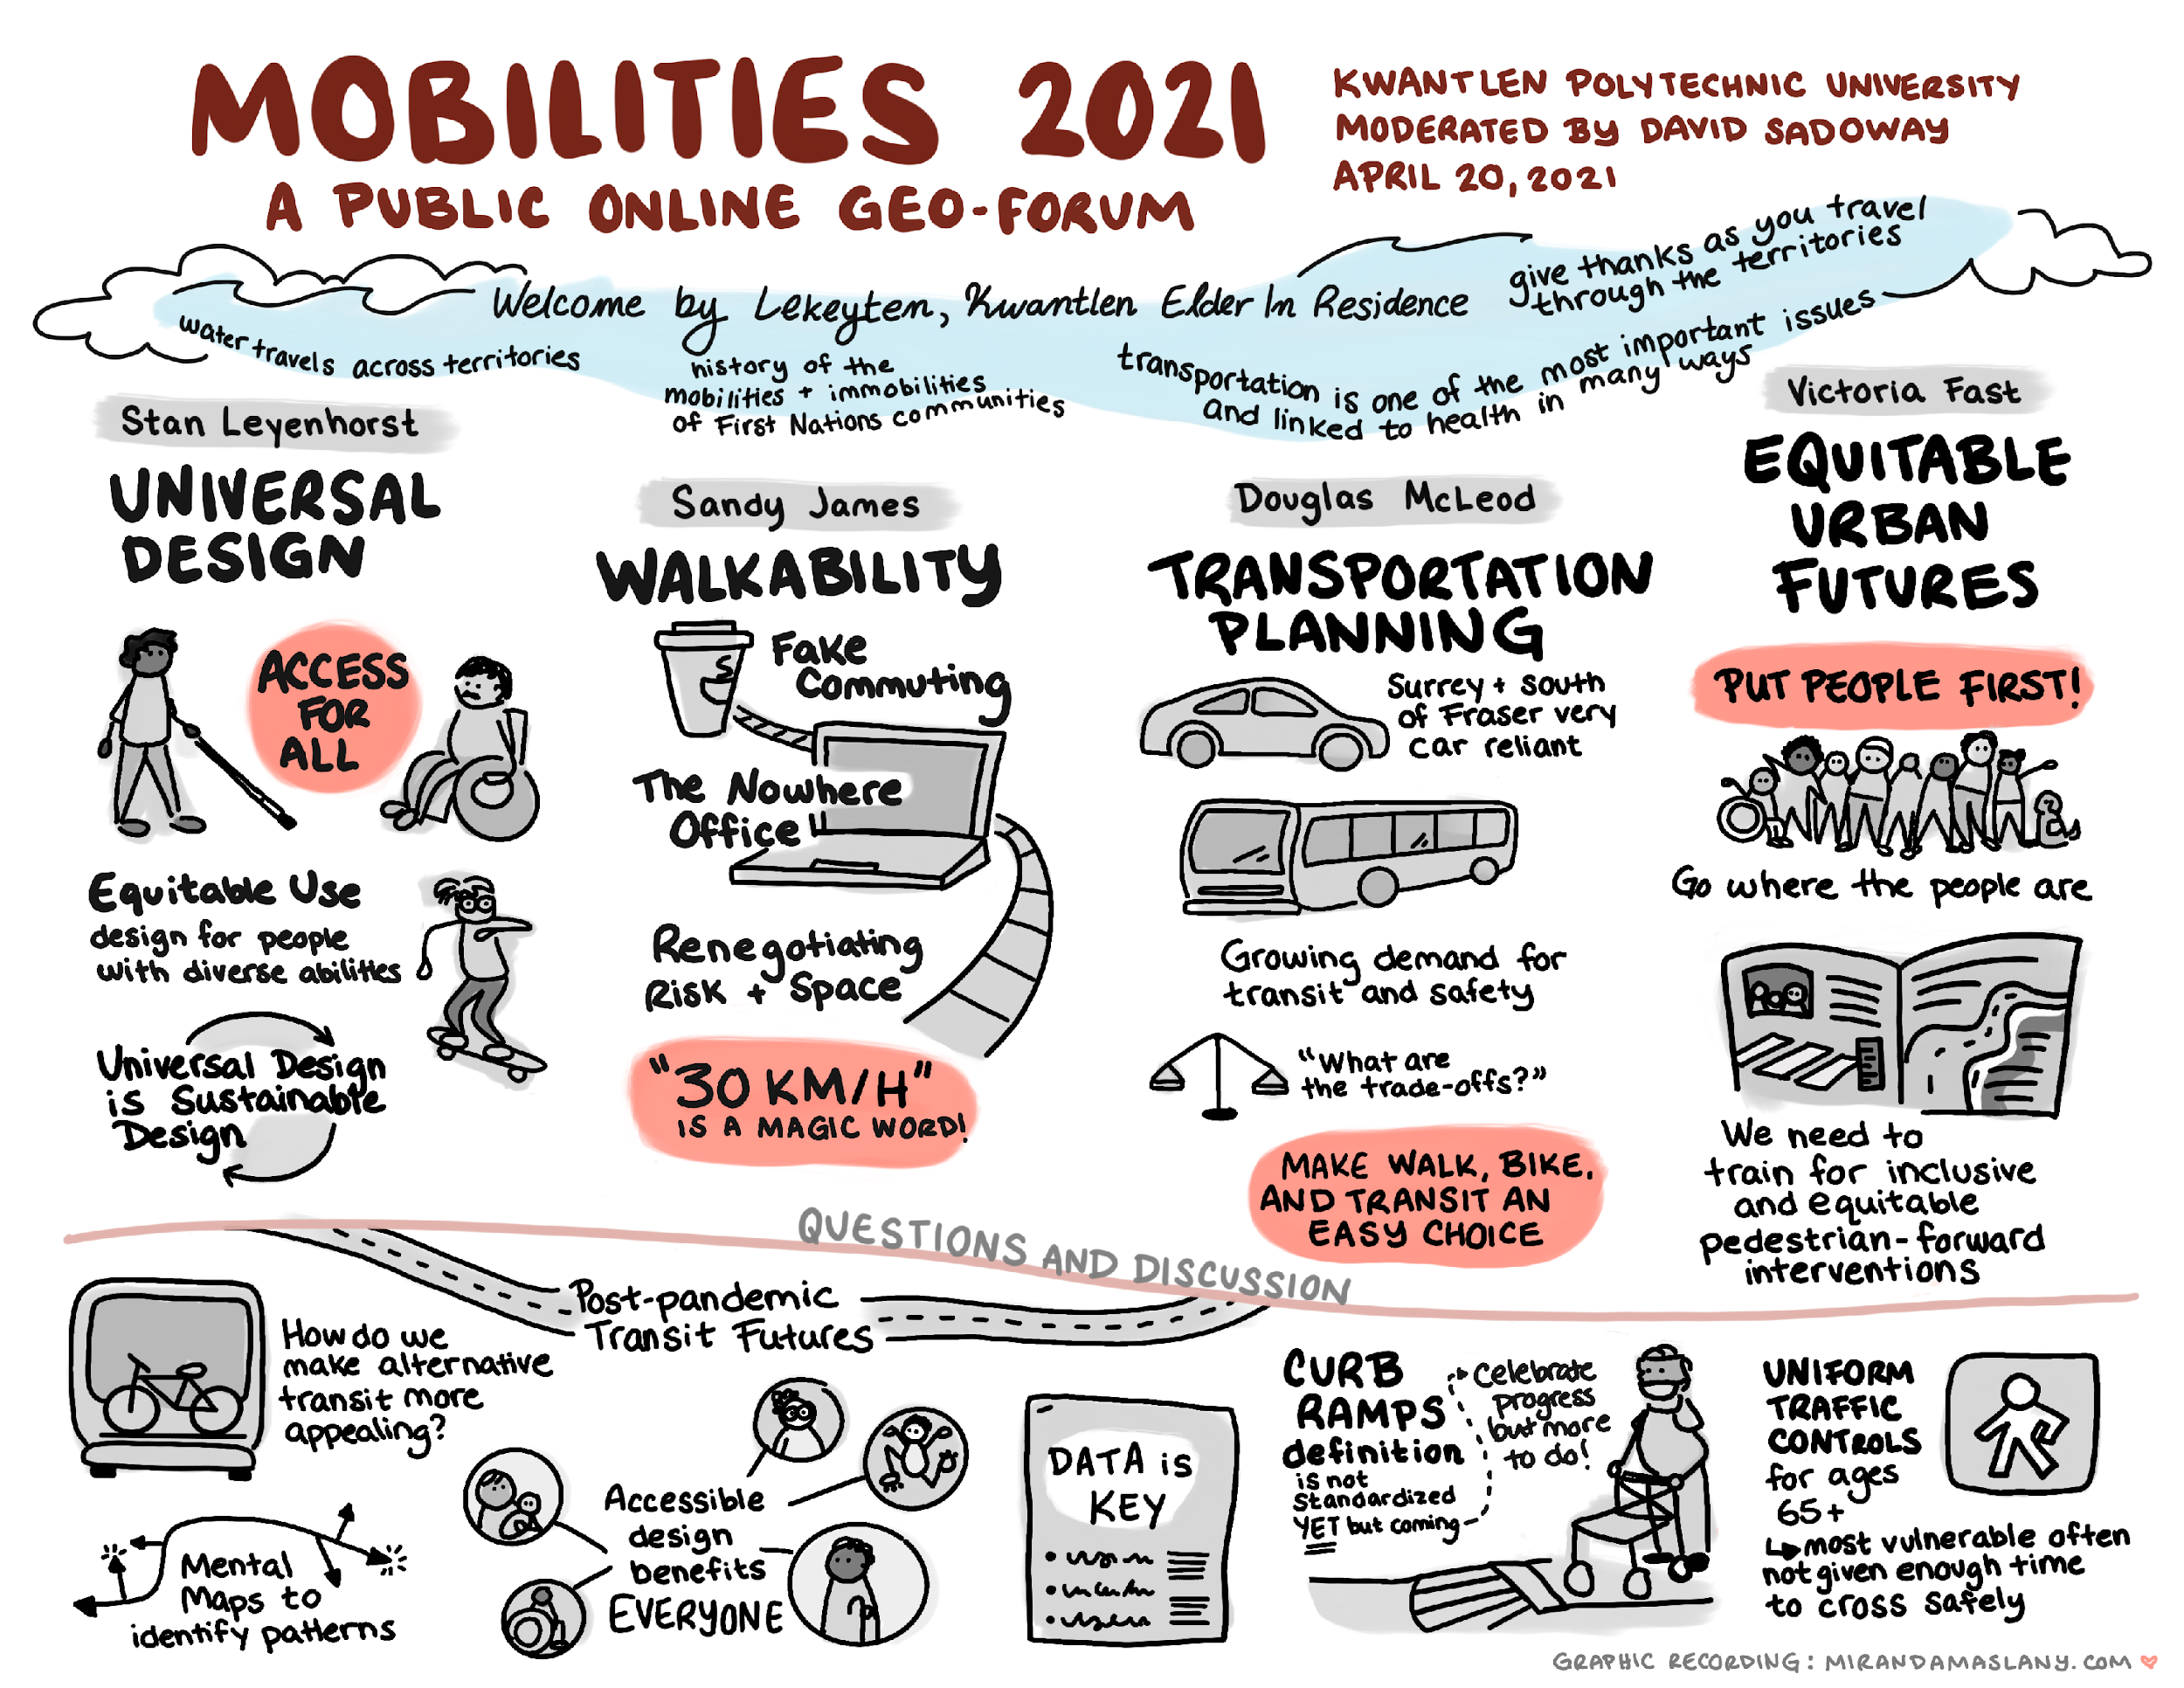 mind-map image of events and themes from the online event, MOBILITIES 2021